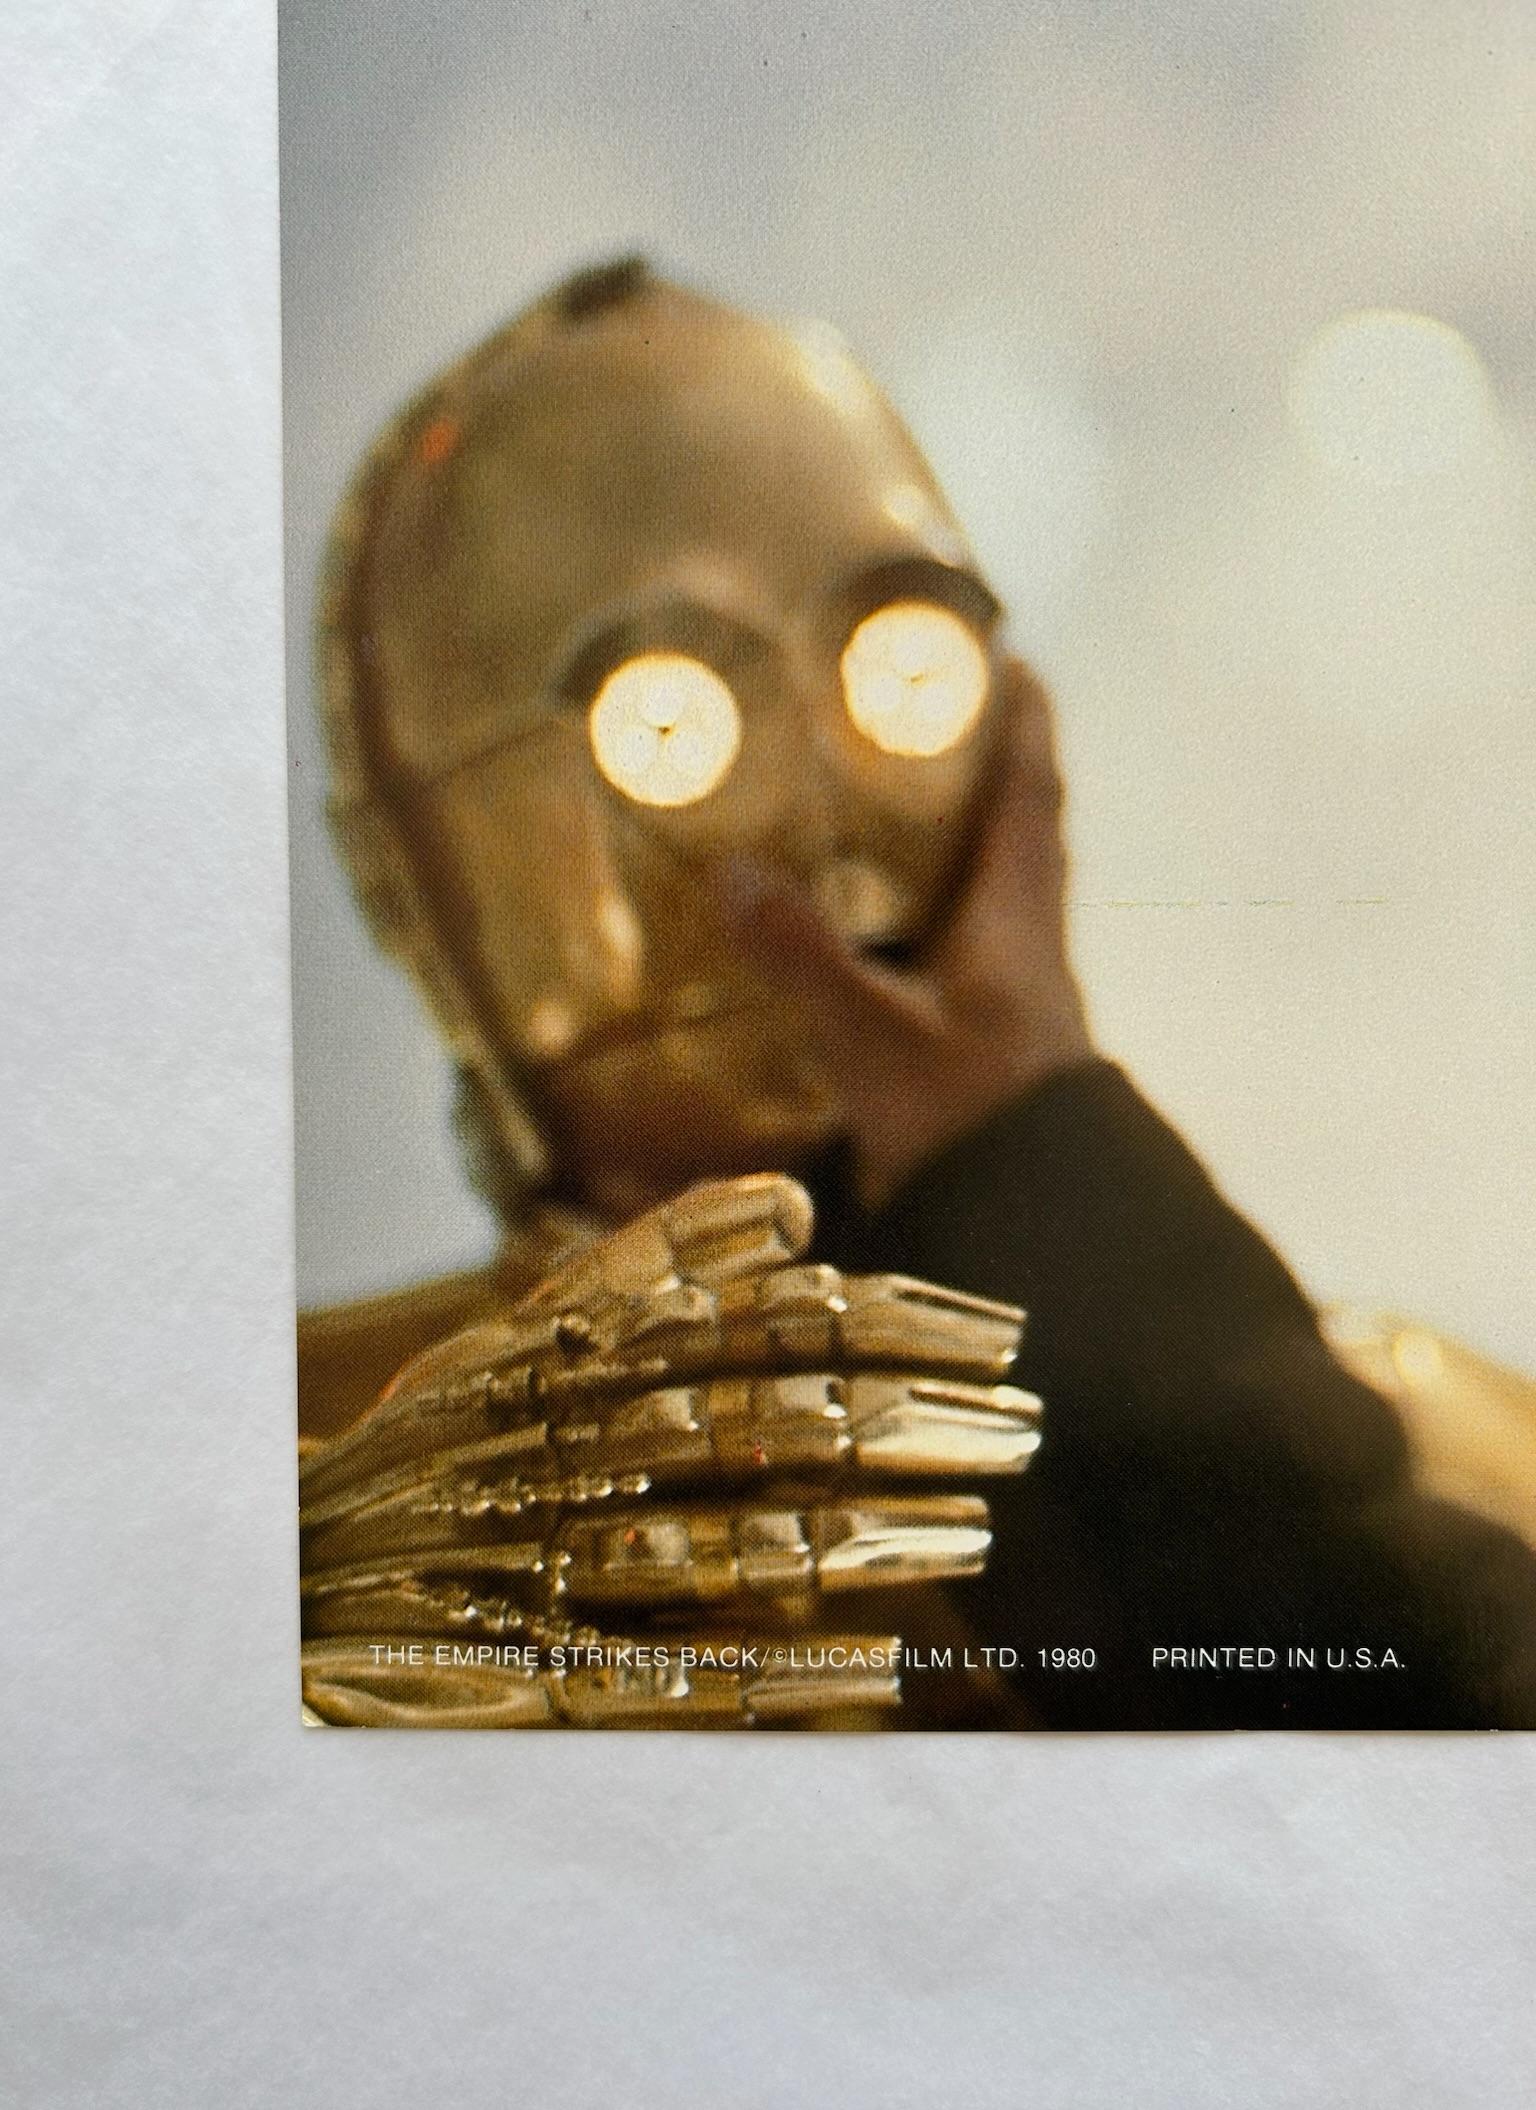 Star Wars C3PO Han Solo The Empire Strikes Back 1980 Vintage Cinema Card  - Modern Print by Unknown